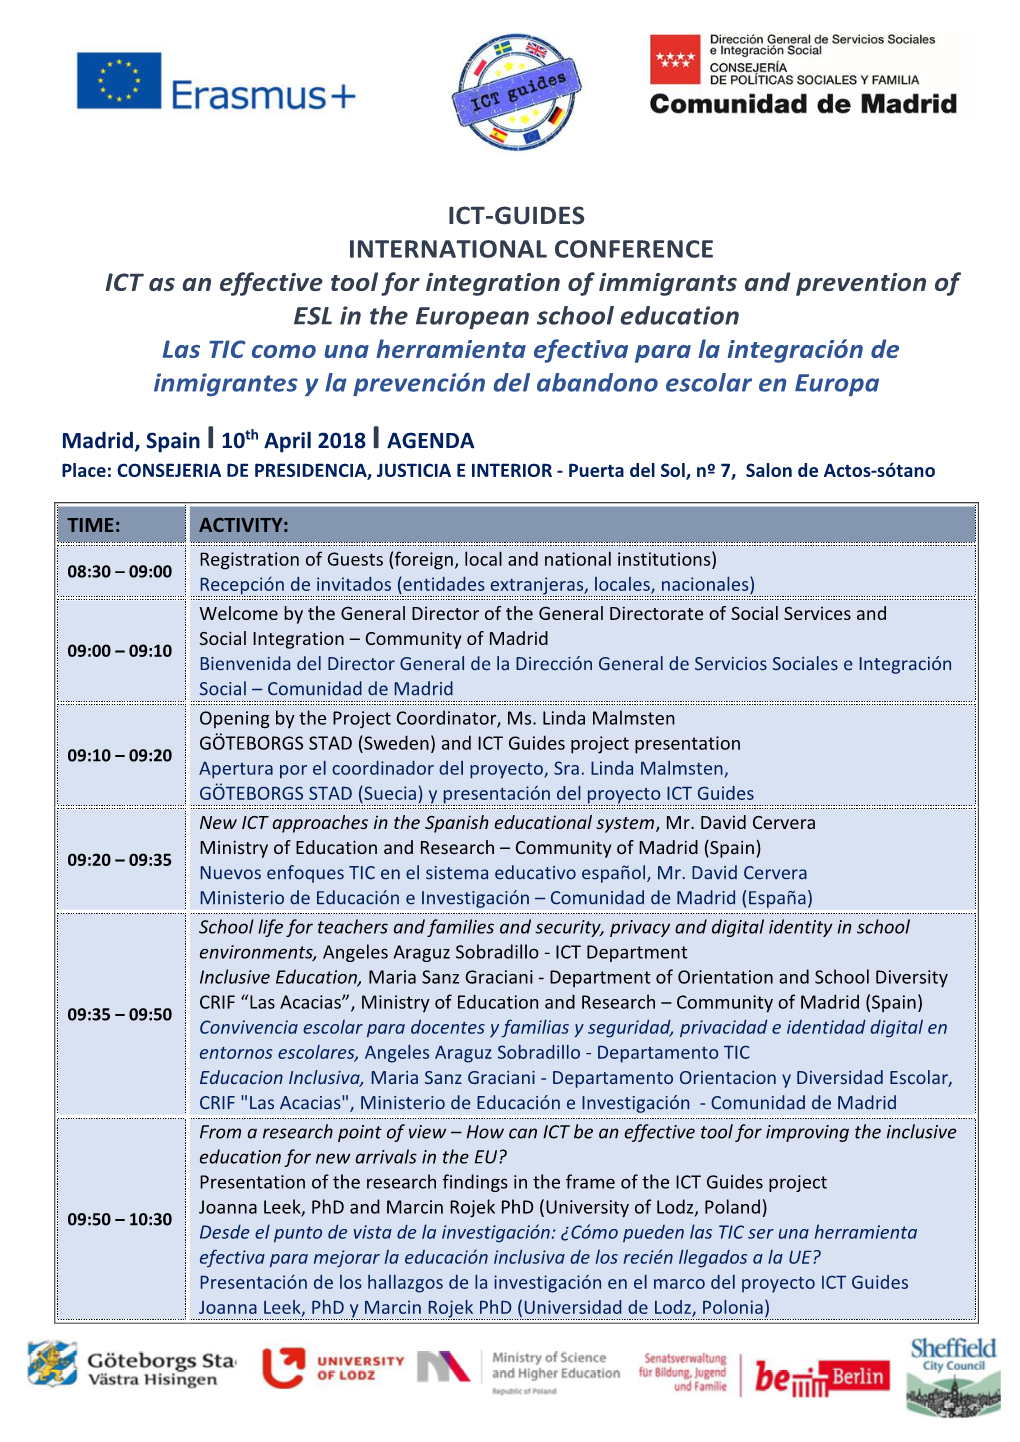 ICT-GUIDES INTERNATIONAL CONFERENCE ICT As an Effective